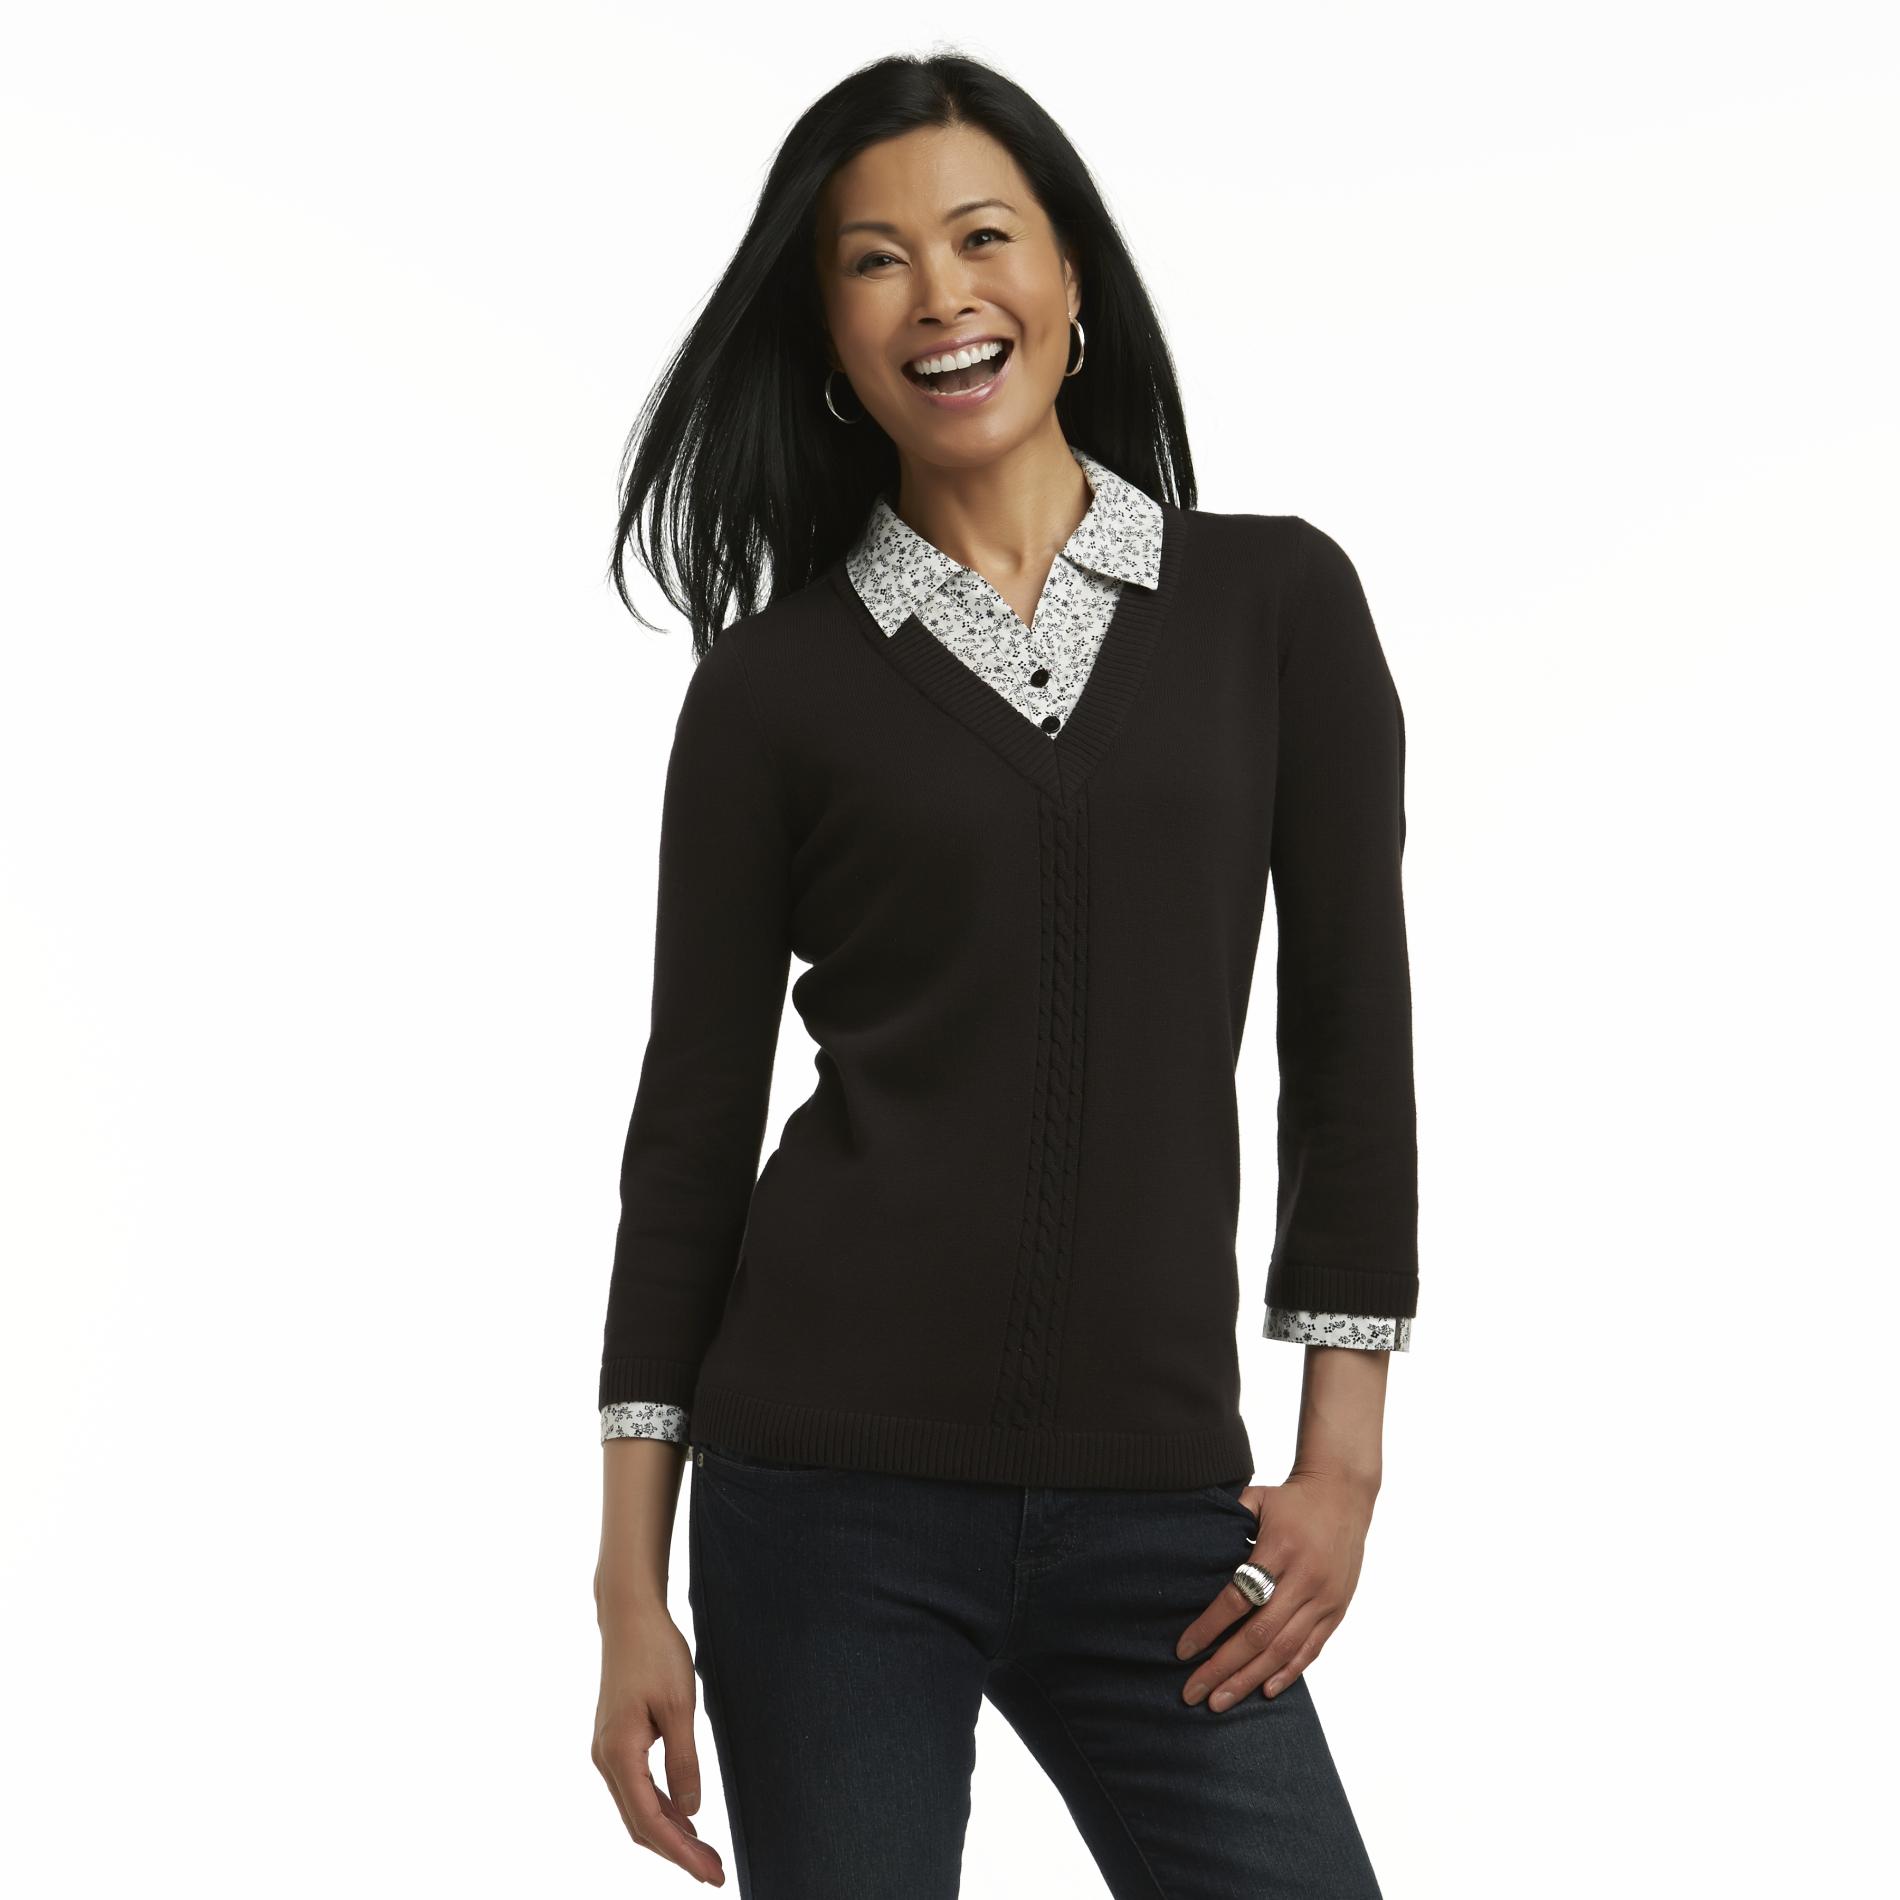 Basic Editions Women's Layered-Look V-Neck Sweater